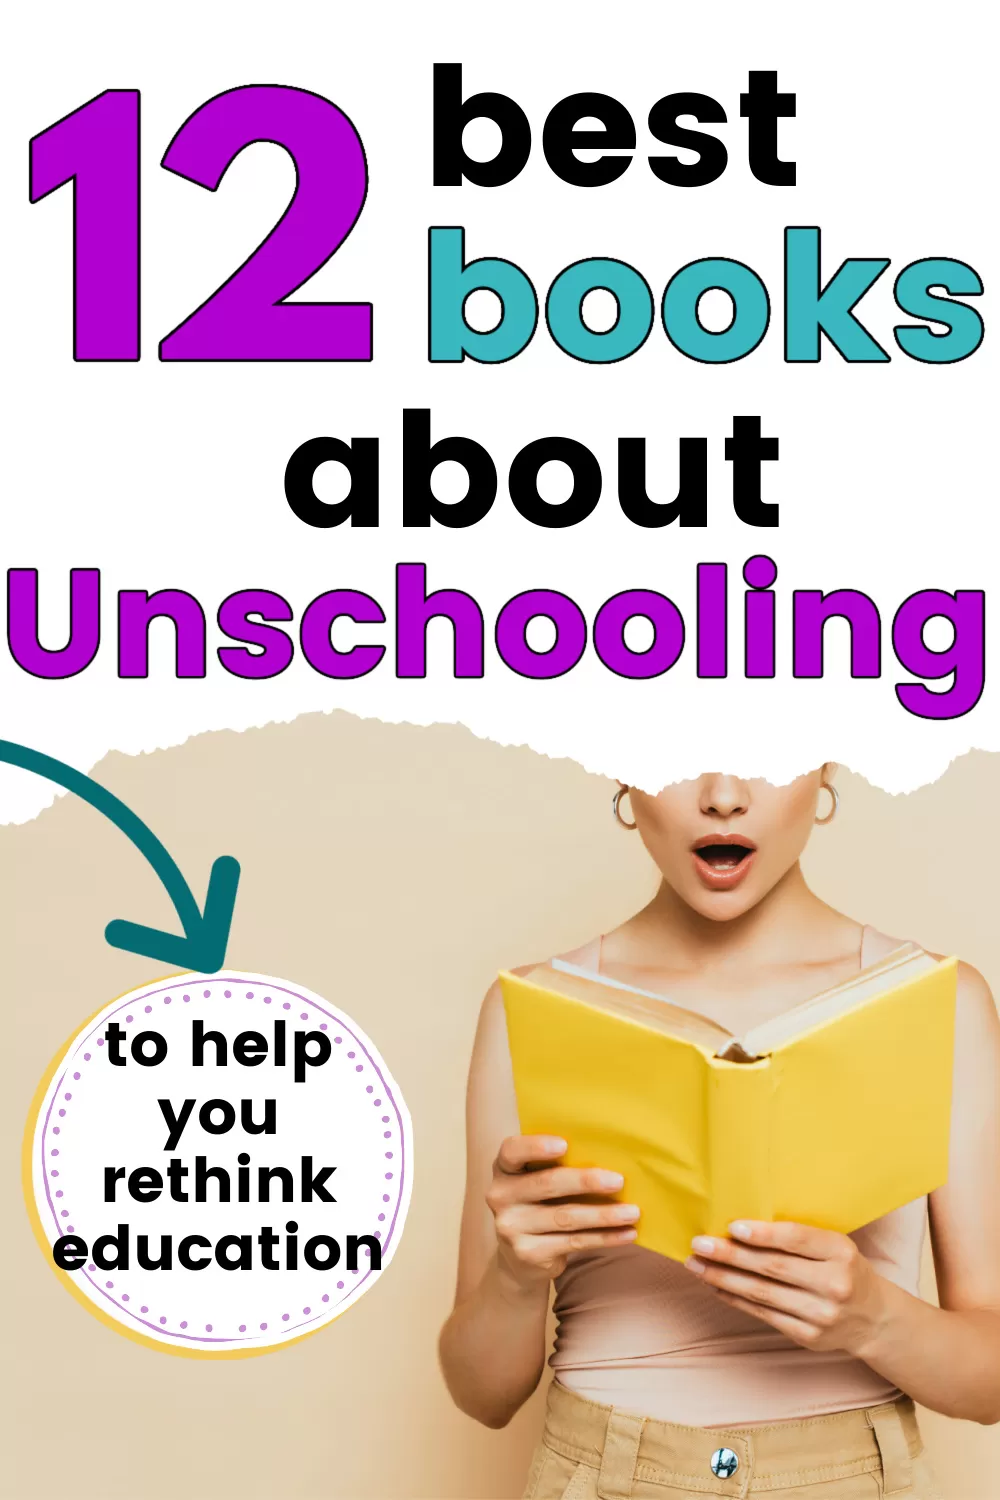 woman reading yellow book, shocked by what she's reading, with text overlay, "12 best books about unschooling to help you rethink education"